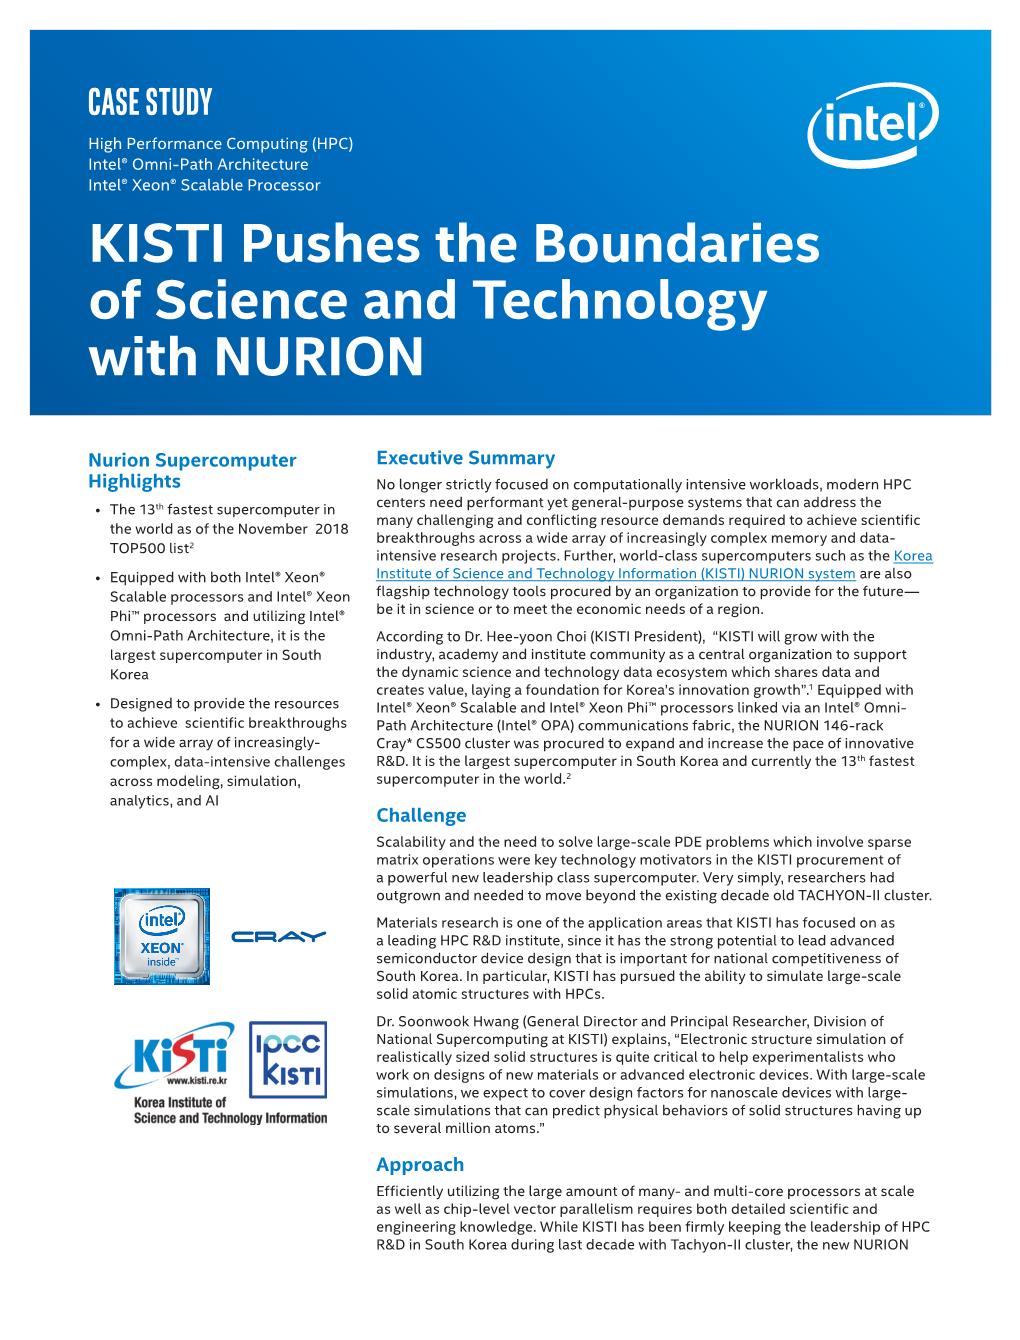 KISTI Pushes the Boundaries of Science and Technology with NURION